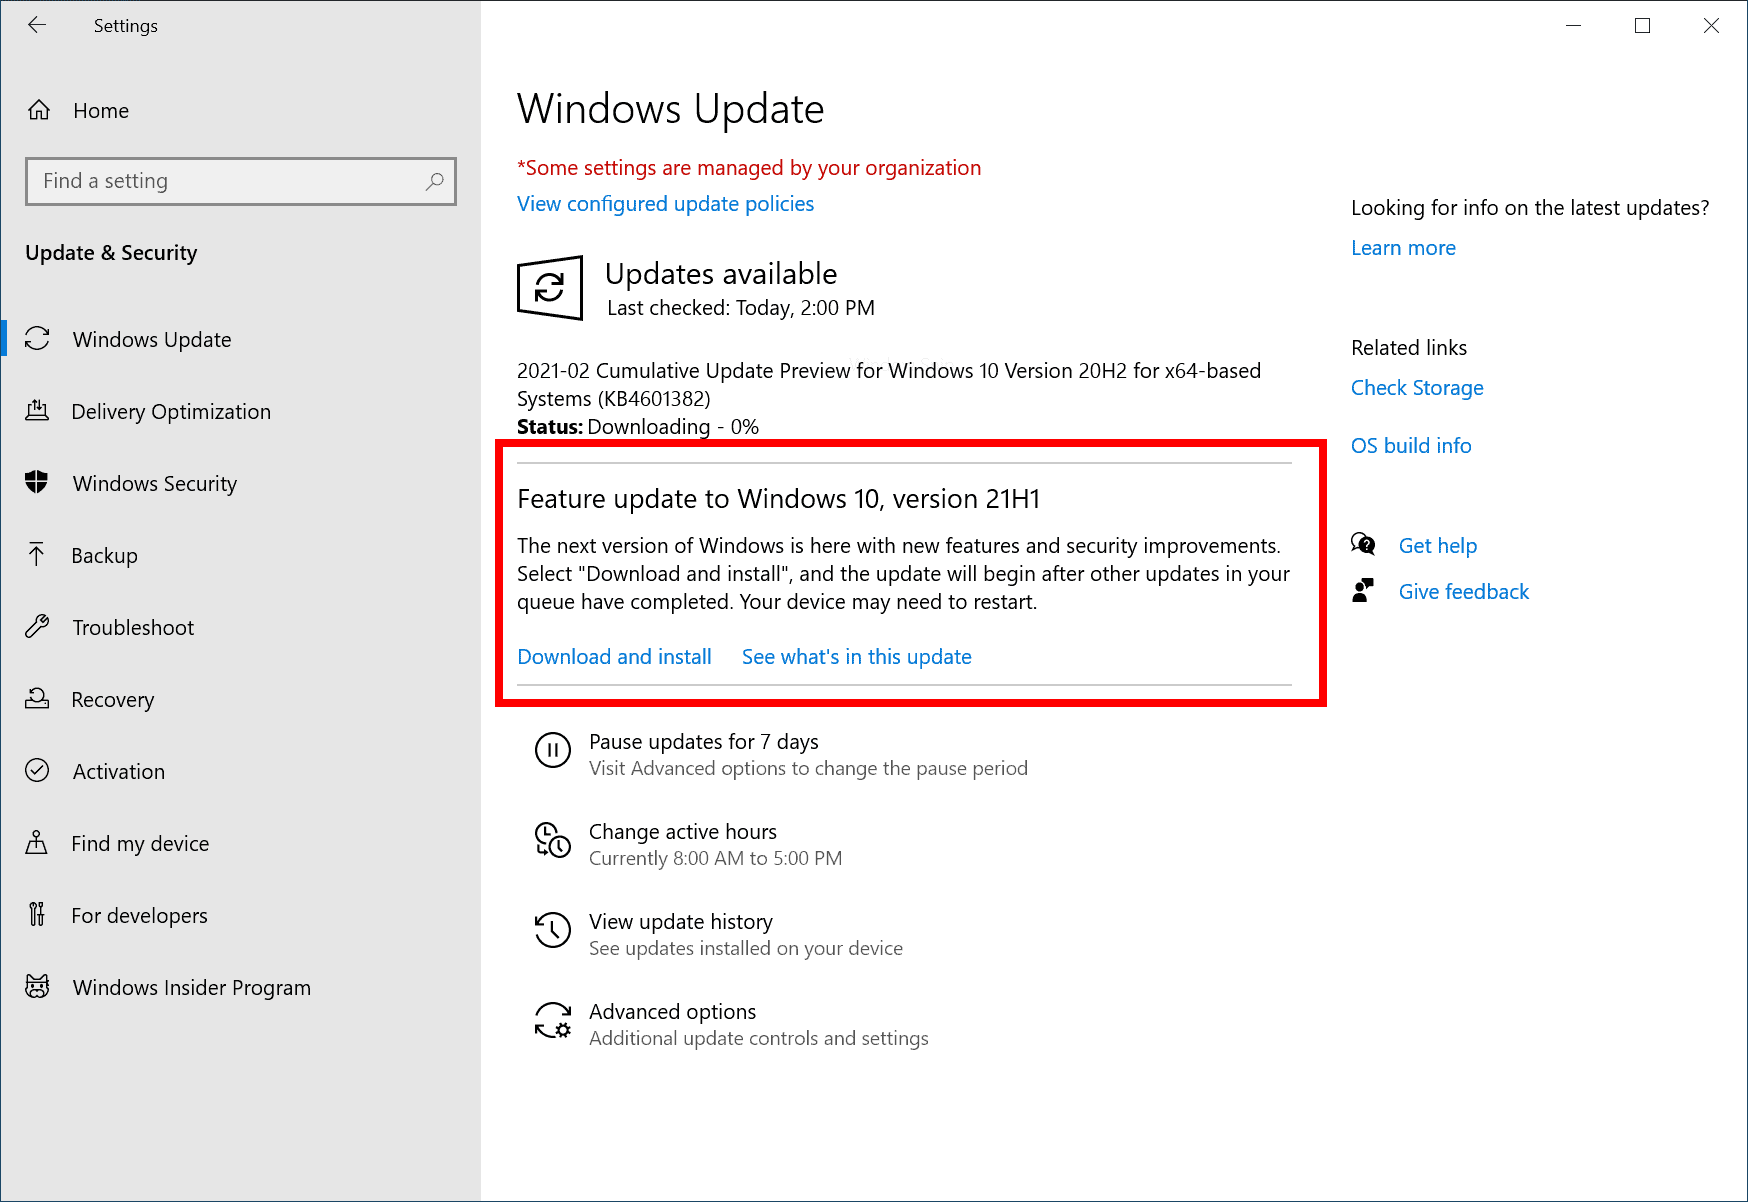 Microsoft is pushing Windows 10 Insider Preview Build 19043.844 (21H1) to all Insiders in the Beta channel